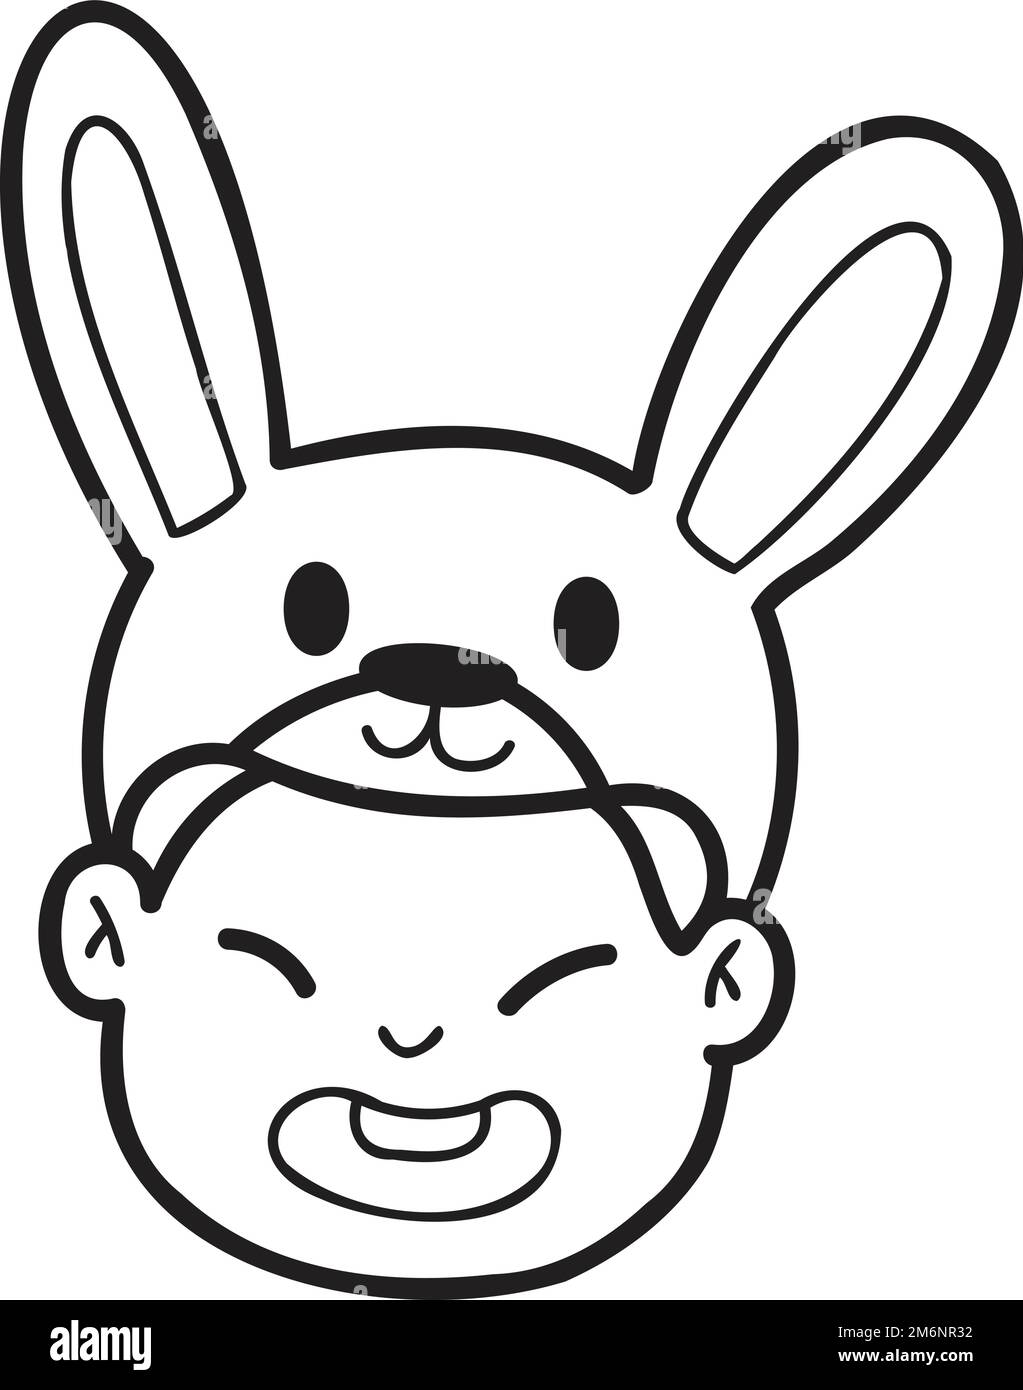 Hand Drawn Chinese boy with rabbit hat illustration isolated on background Stock Vector